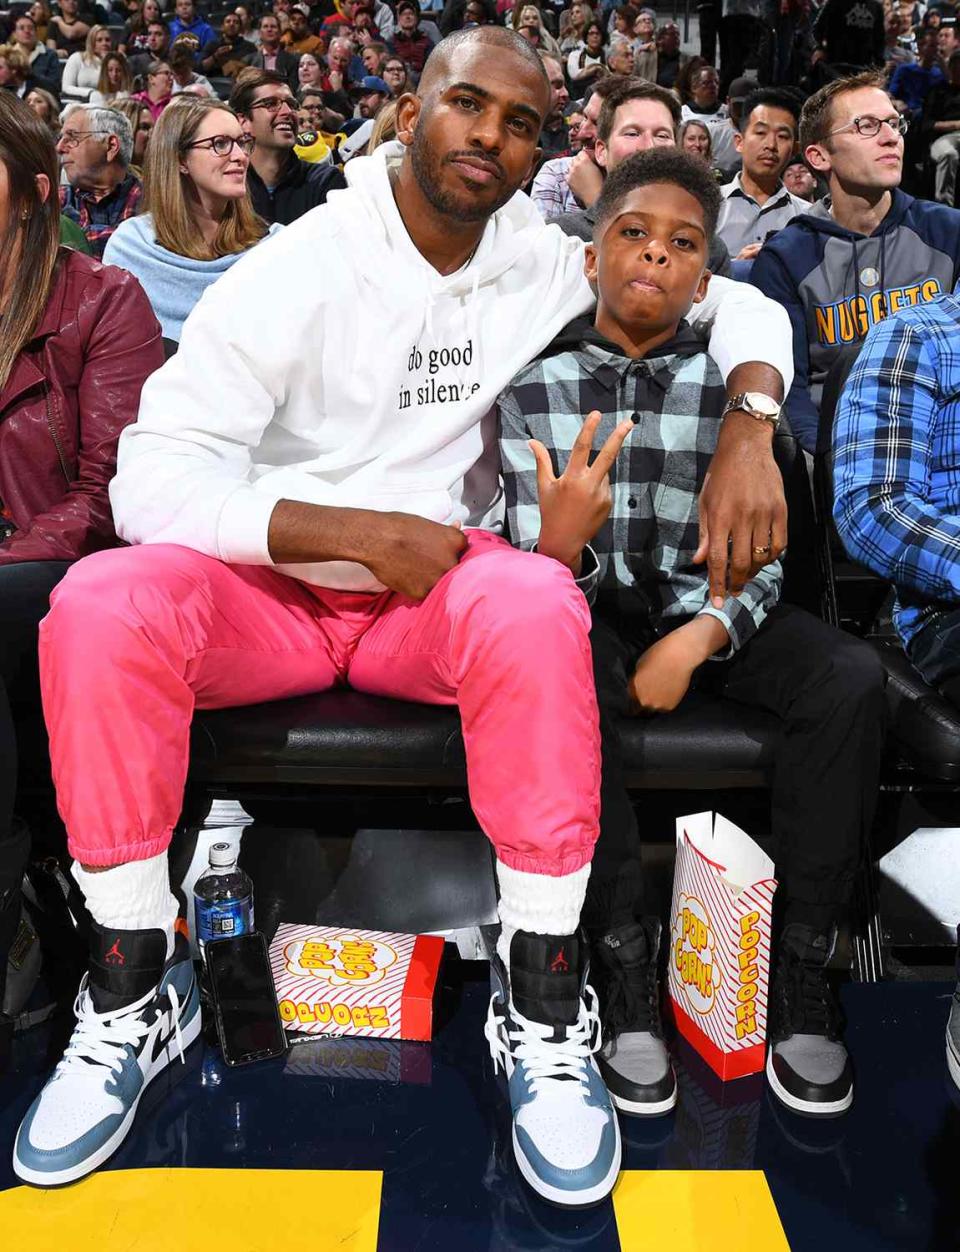 Chris Paul #3 of the Oklahoma City Thunder and Chris Paul Jr. watches the game on December 12, 2019 at the Pepsi Center in Denver, Colorado